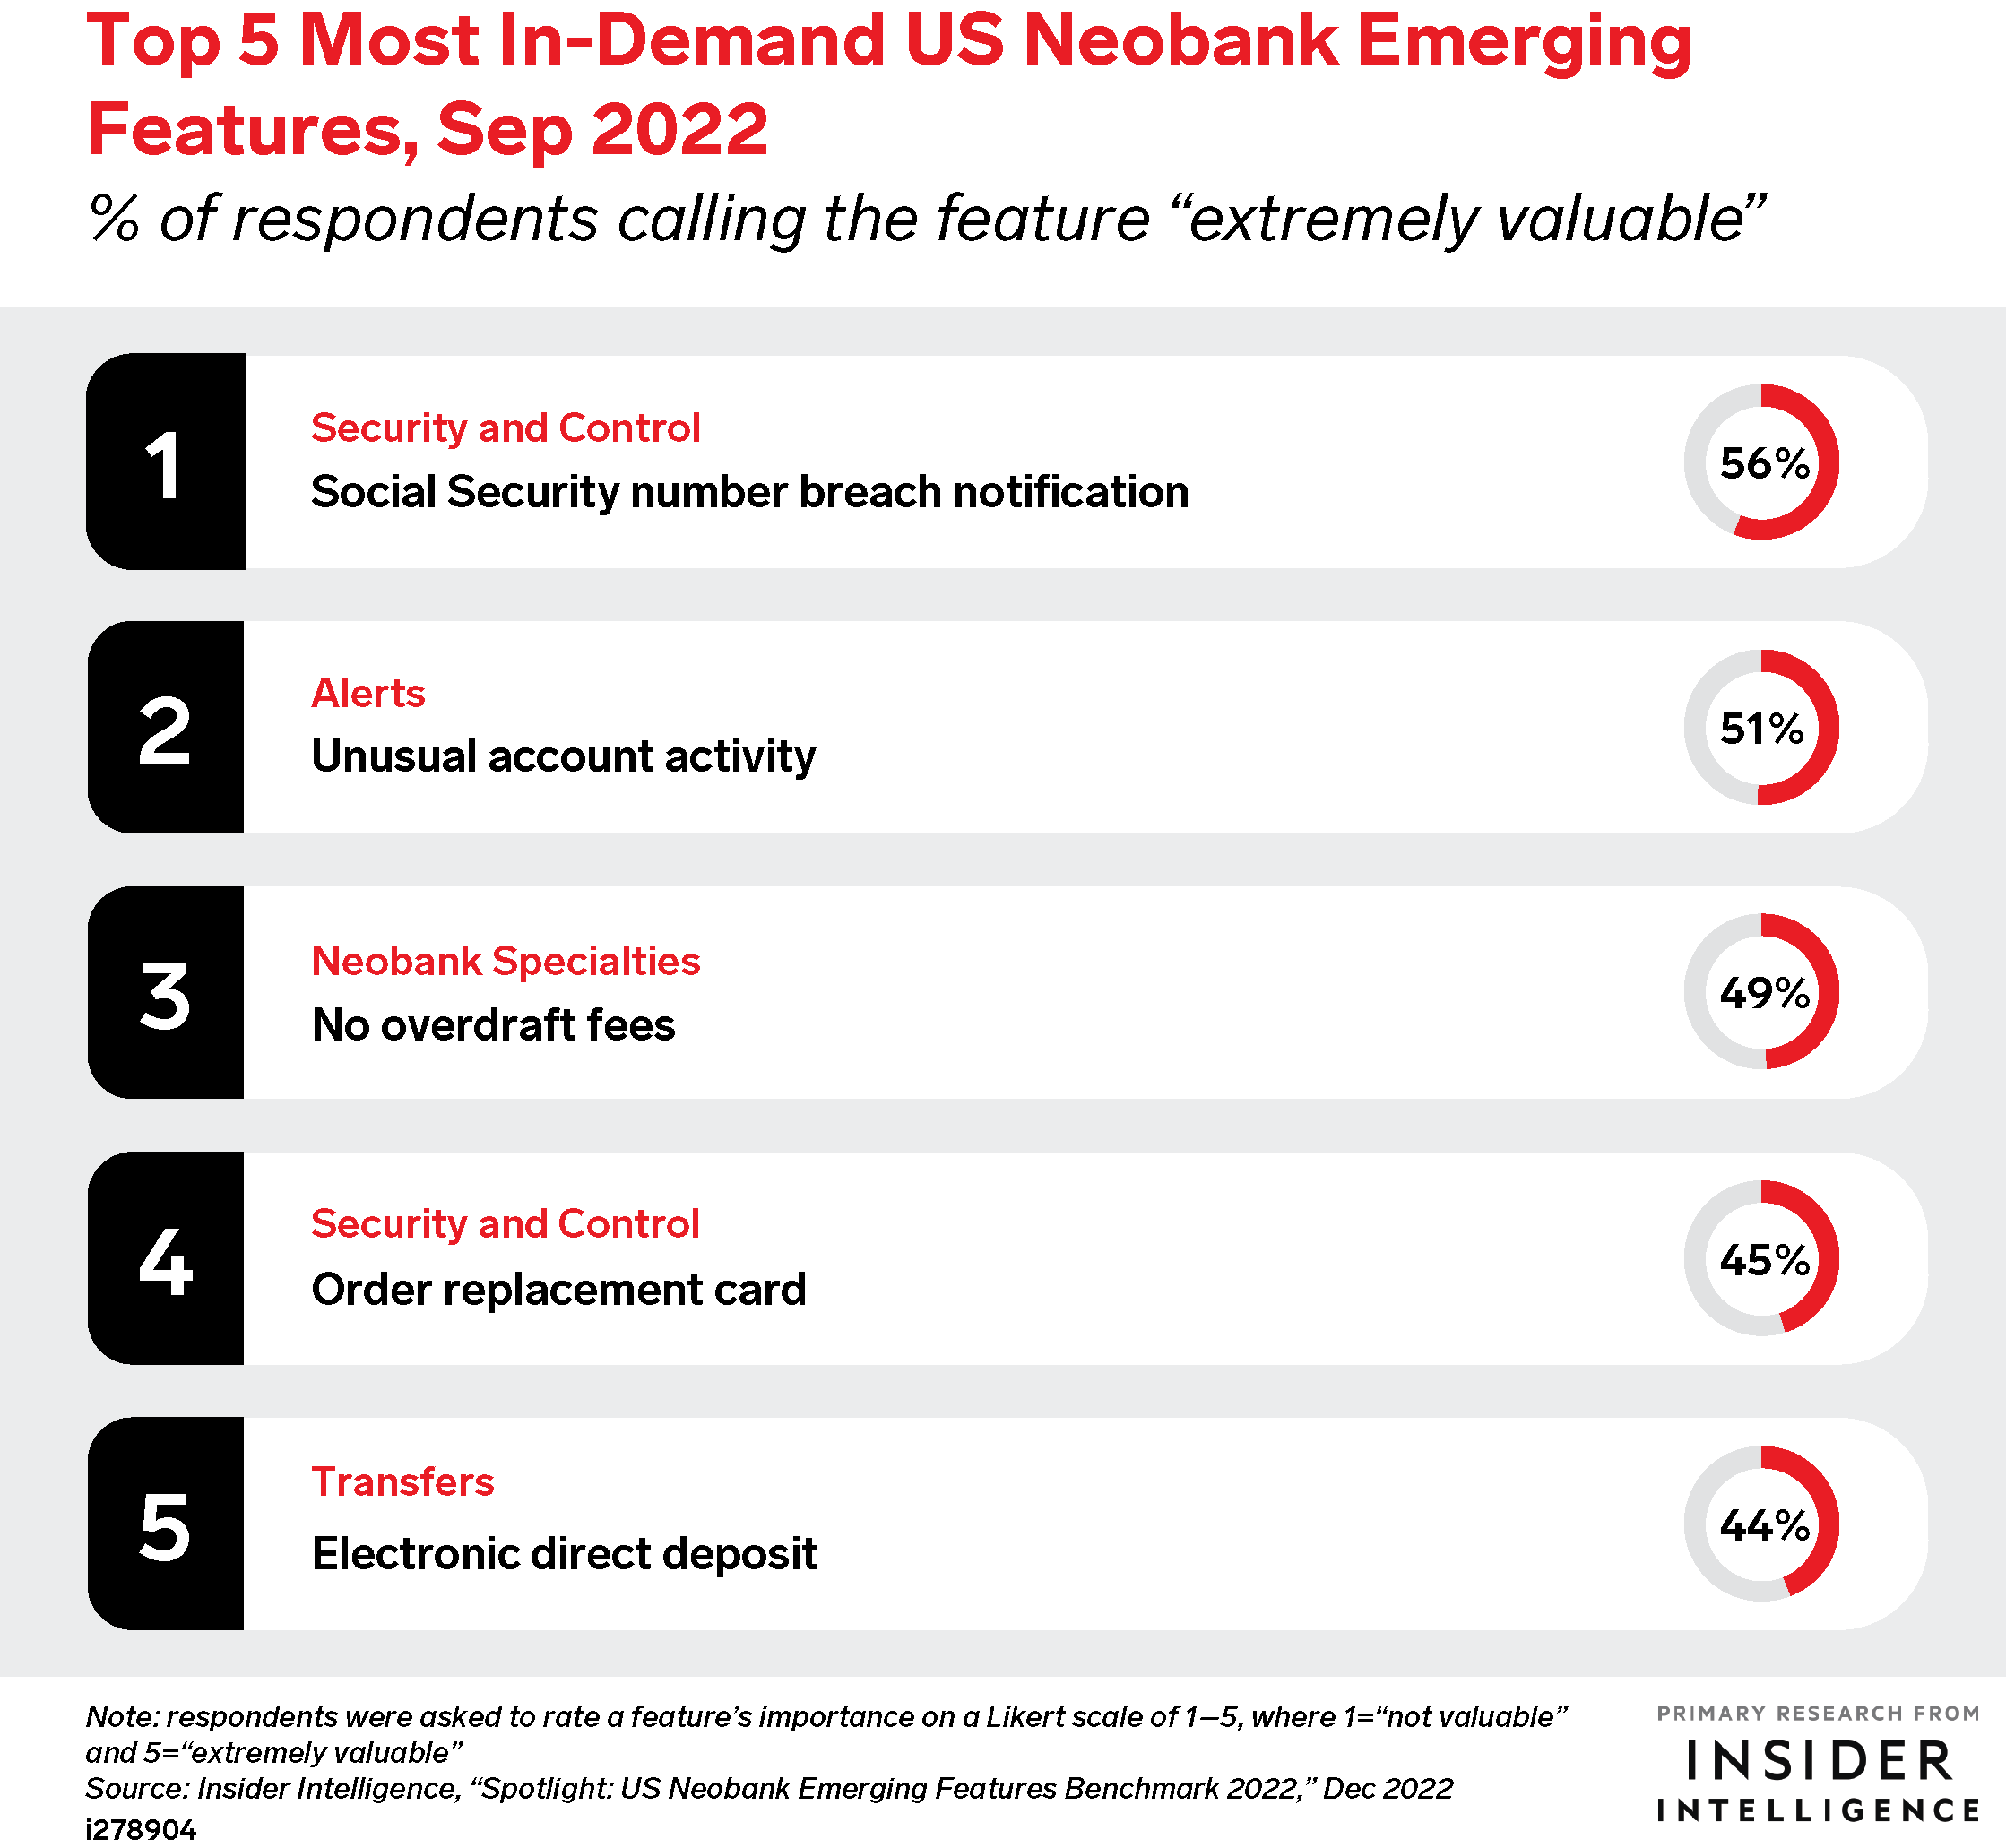 Top 5 Most In-Demand US Neobank Emerging Features, Sep 2022 (% of respondents calling the feature 